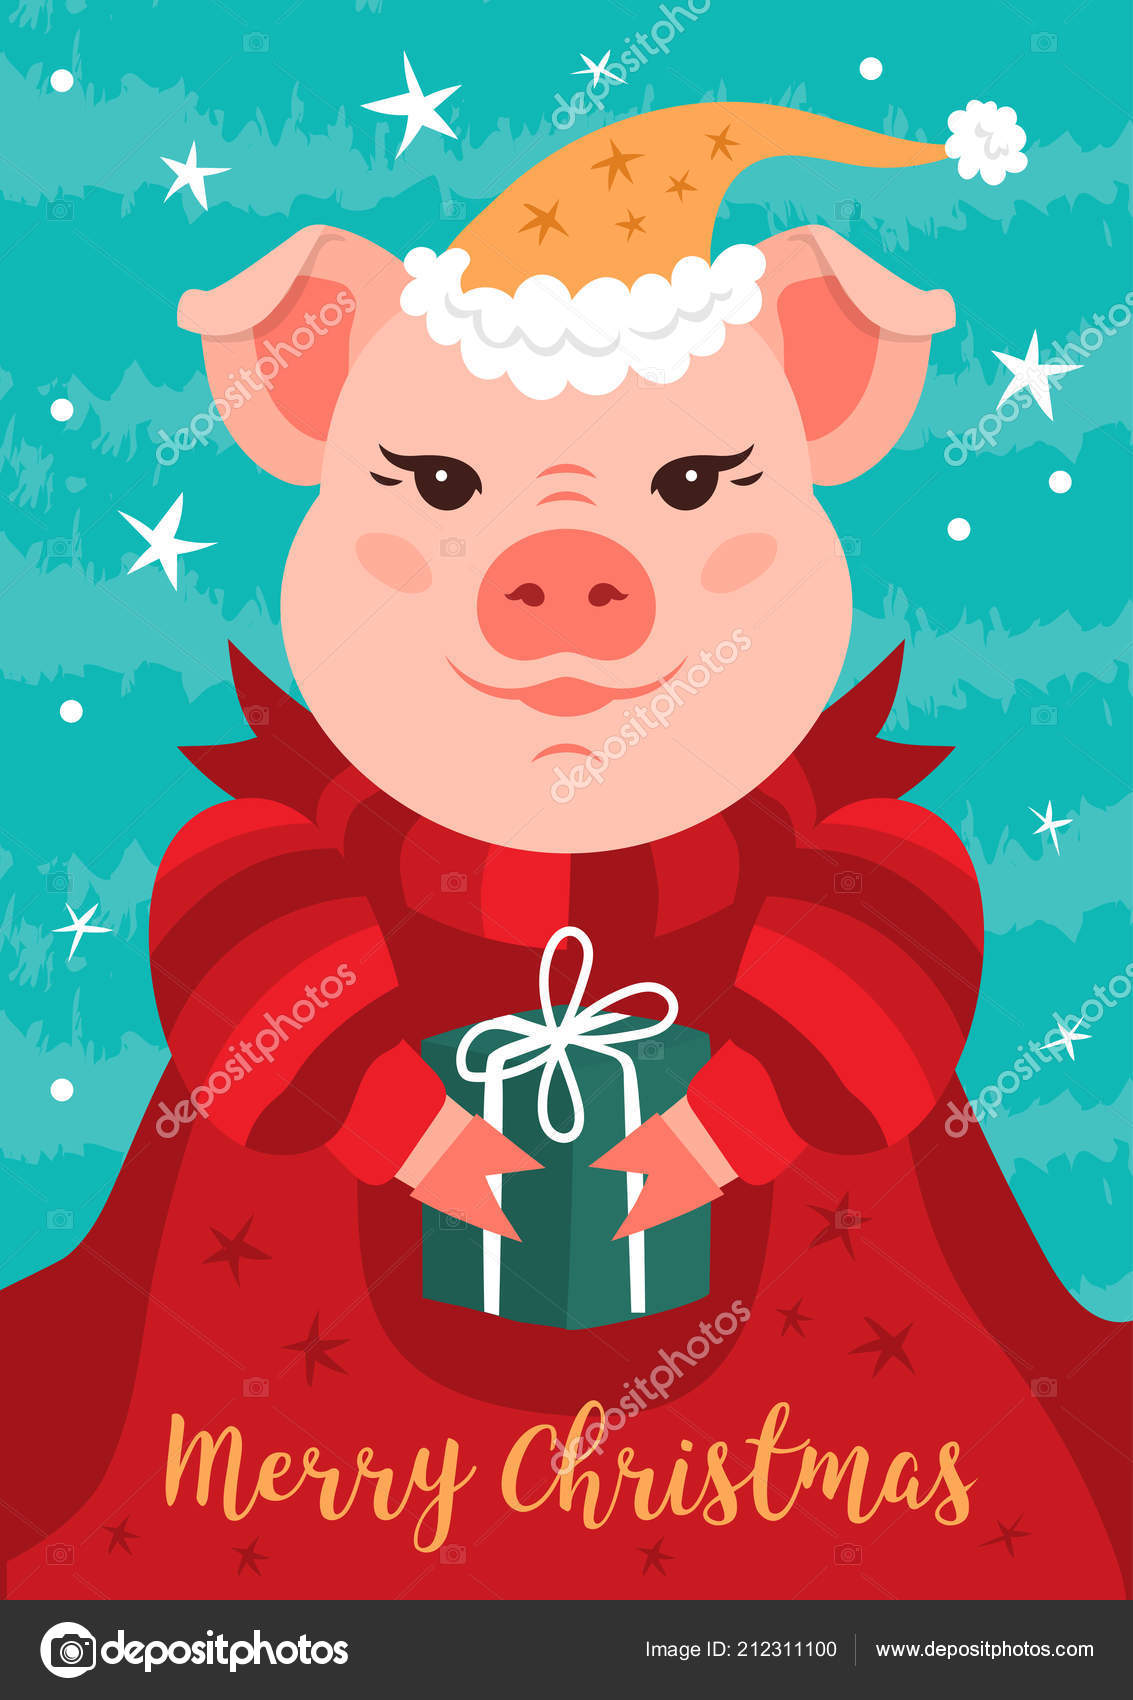 Merry Christmas Card Funny Christmas pig A cartoon pig in a red Santa Claus hat holds a t a turquoise background and snowflakes